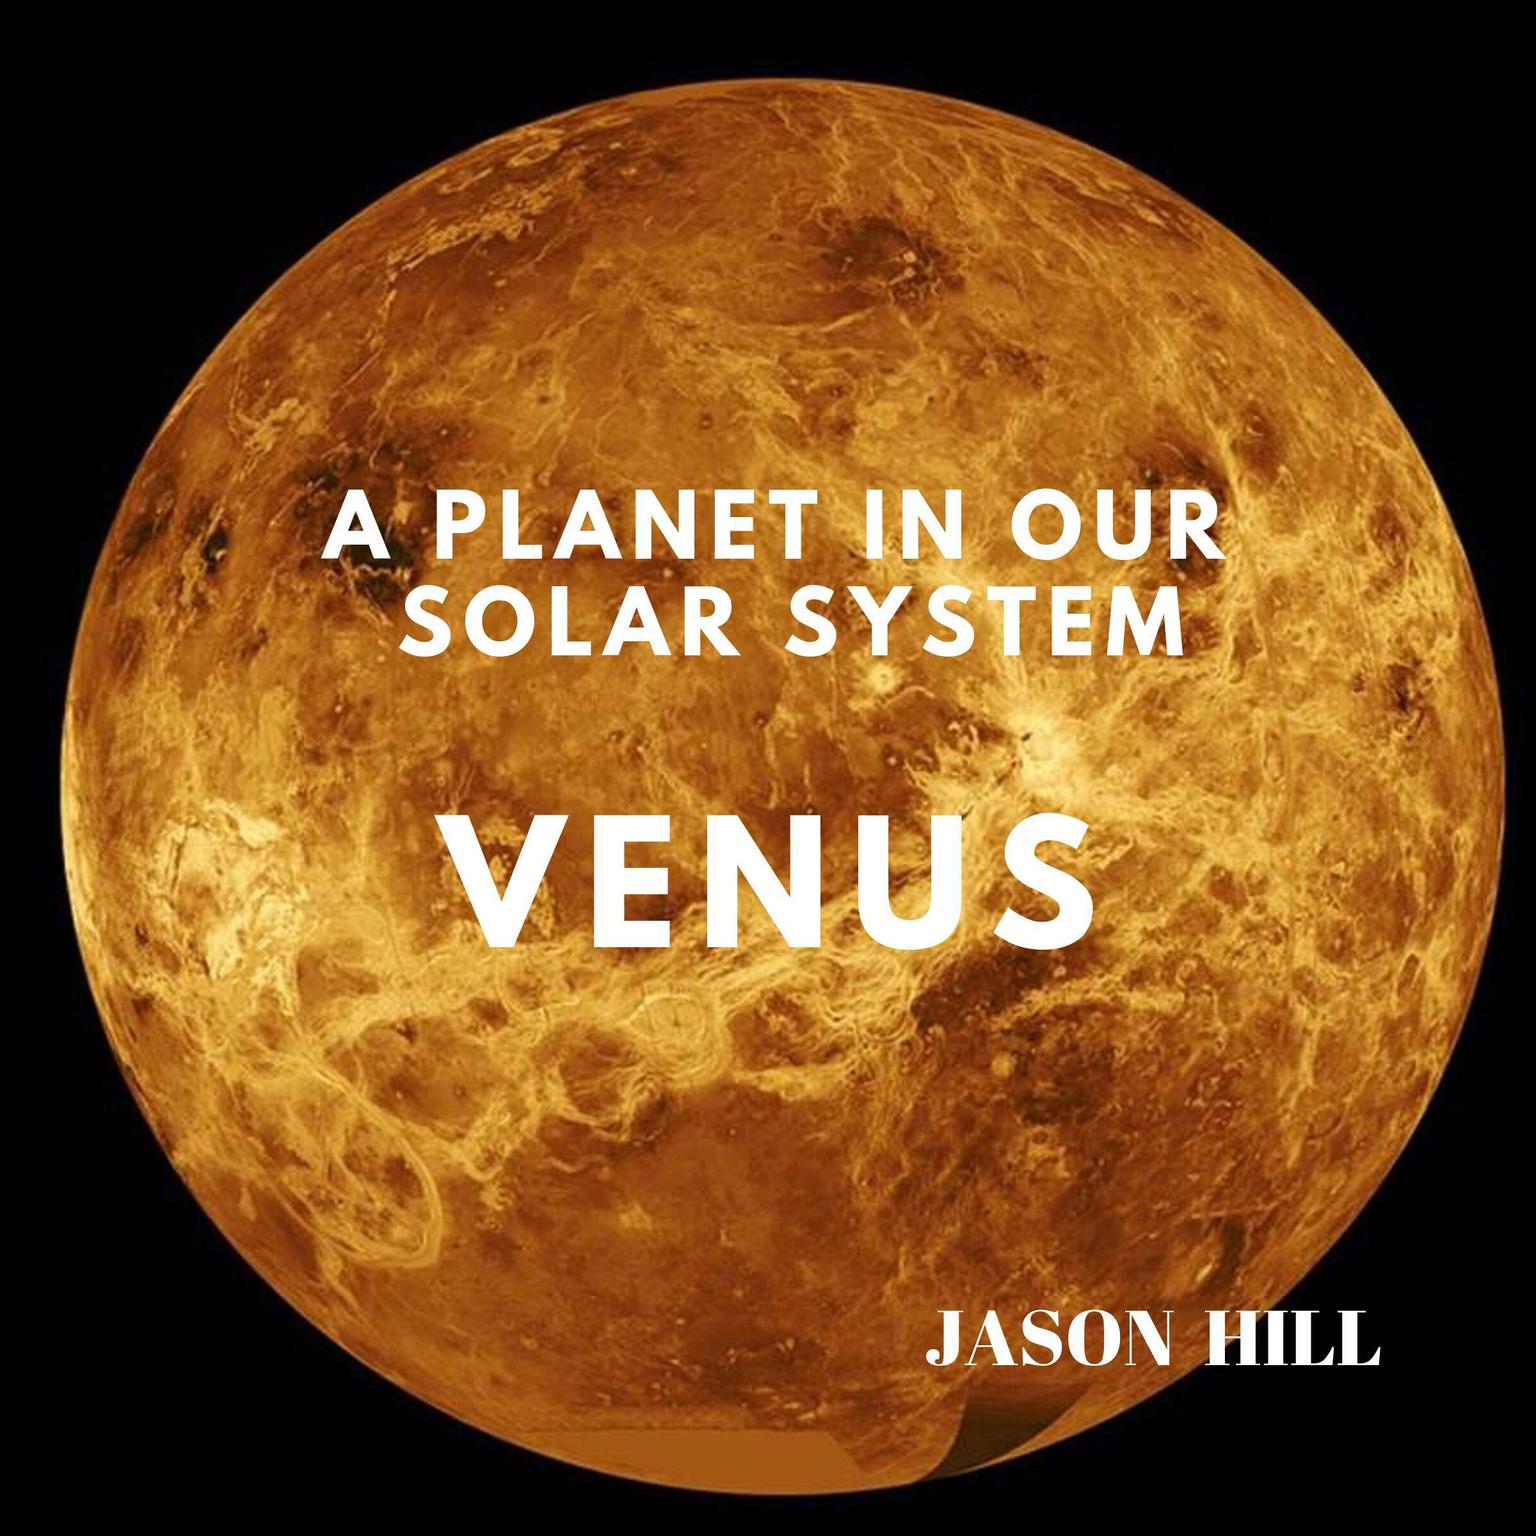 Venus: A Planet in our Solar System Audiobook, by Jason Hill